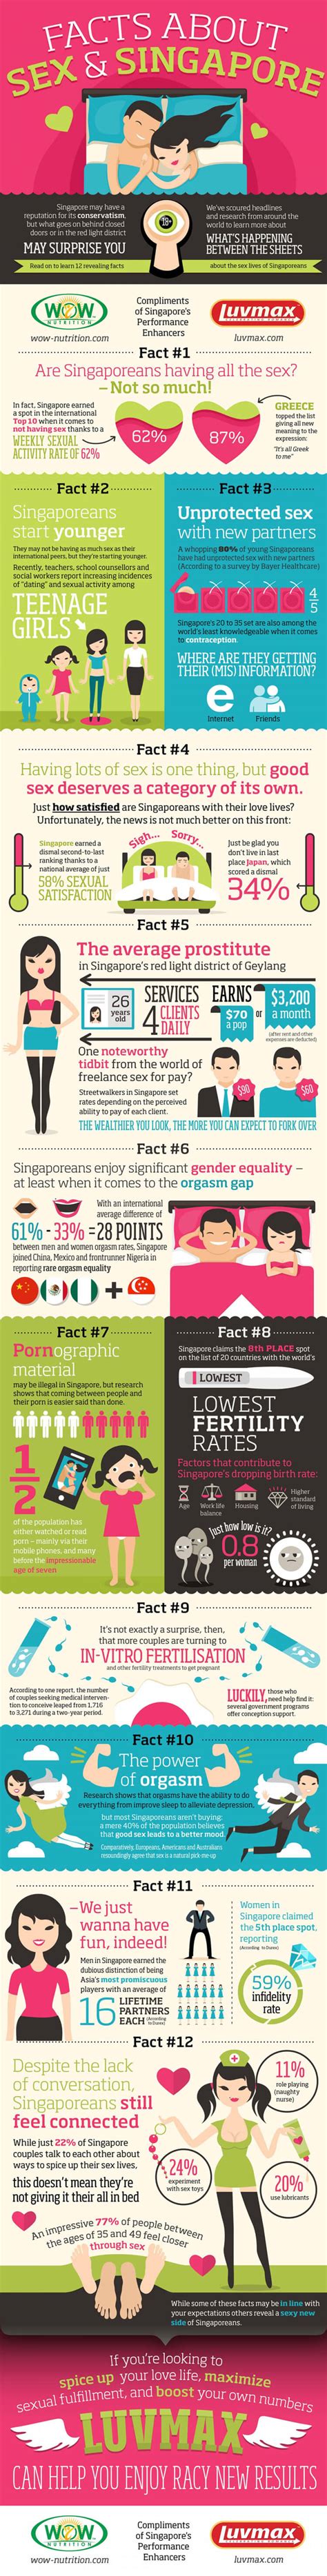 facts about sex and singapore infographic plaza